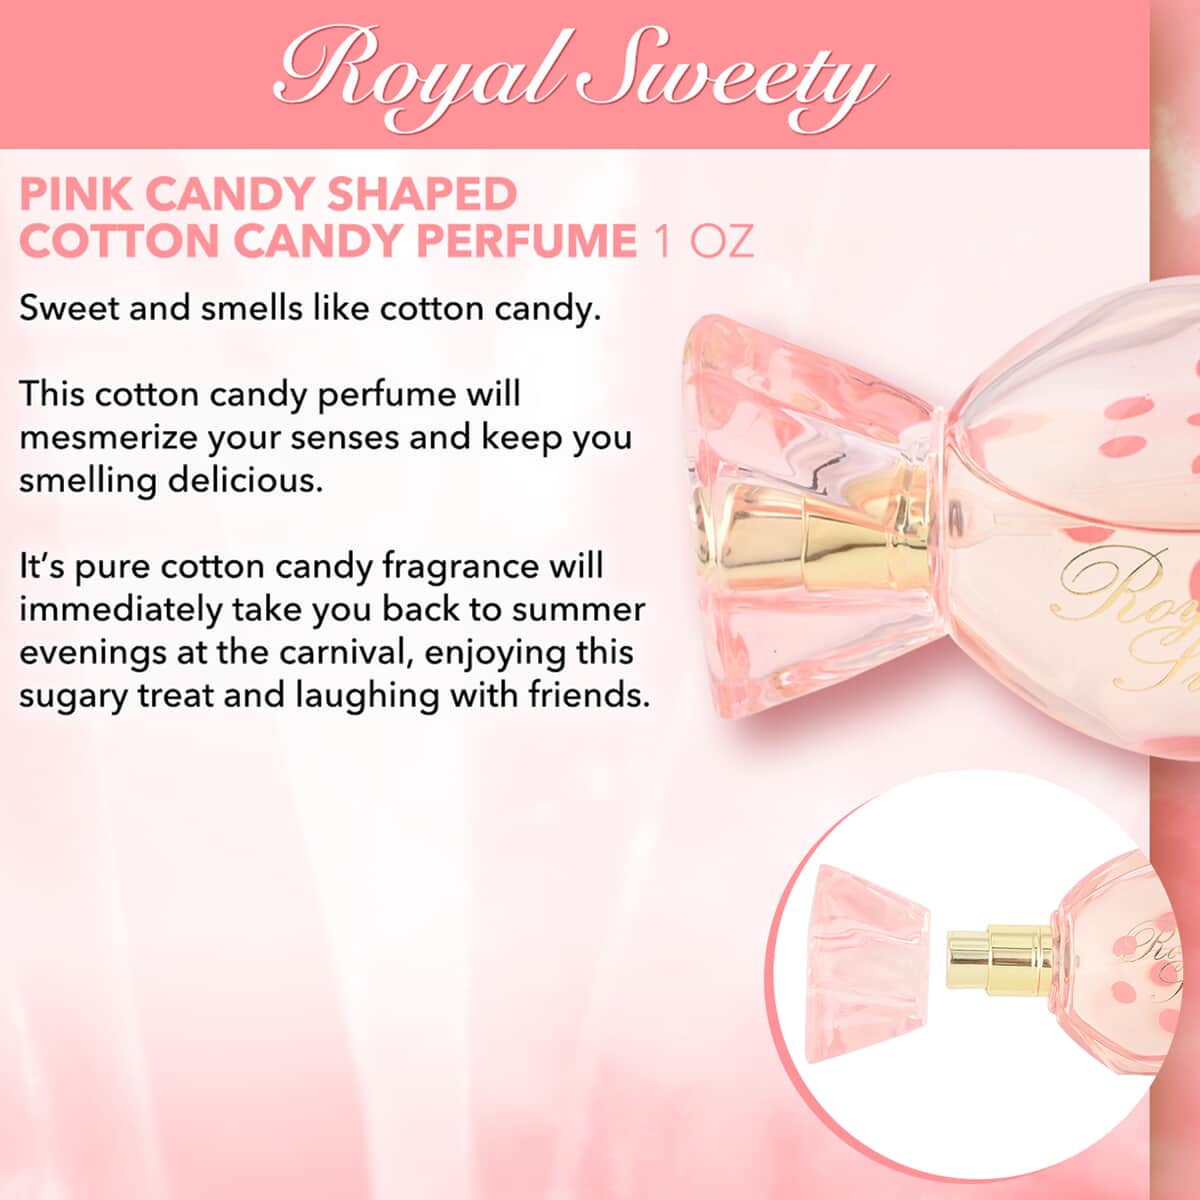 Royal Sweety Pink Candy Shaped Cotton Candy Perfume 1 oz image number 3